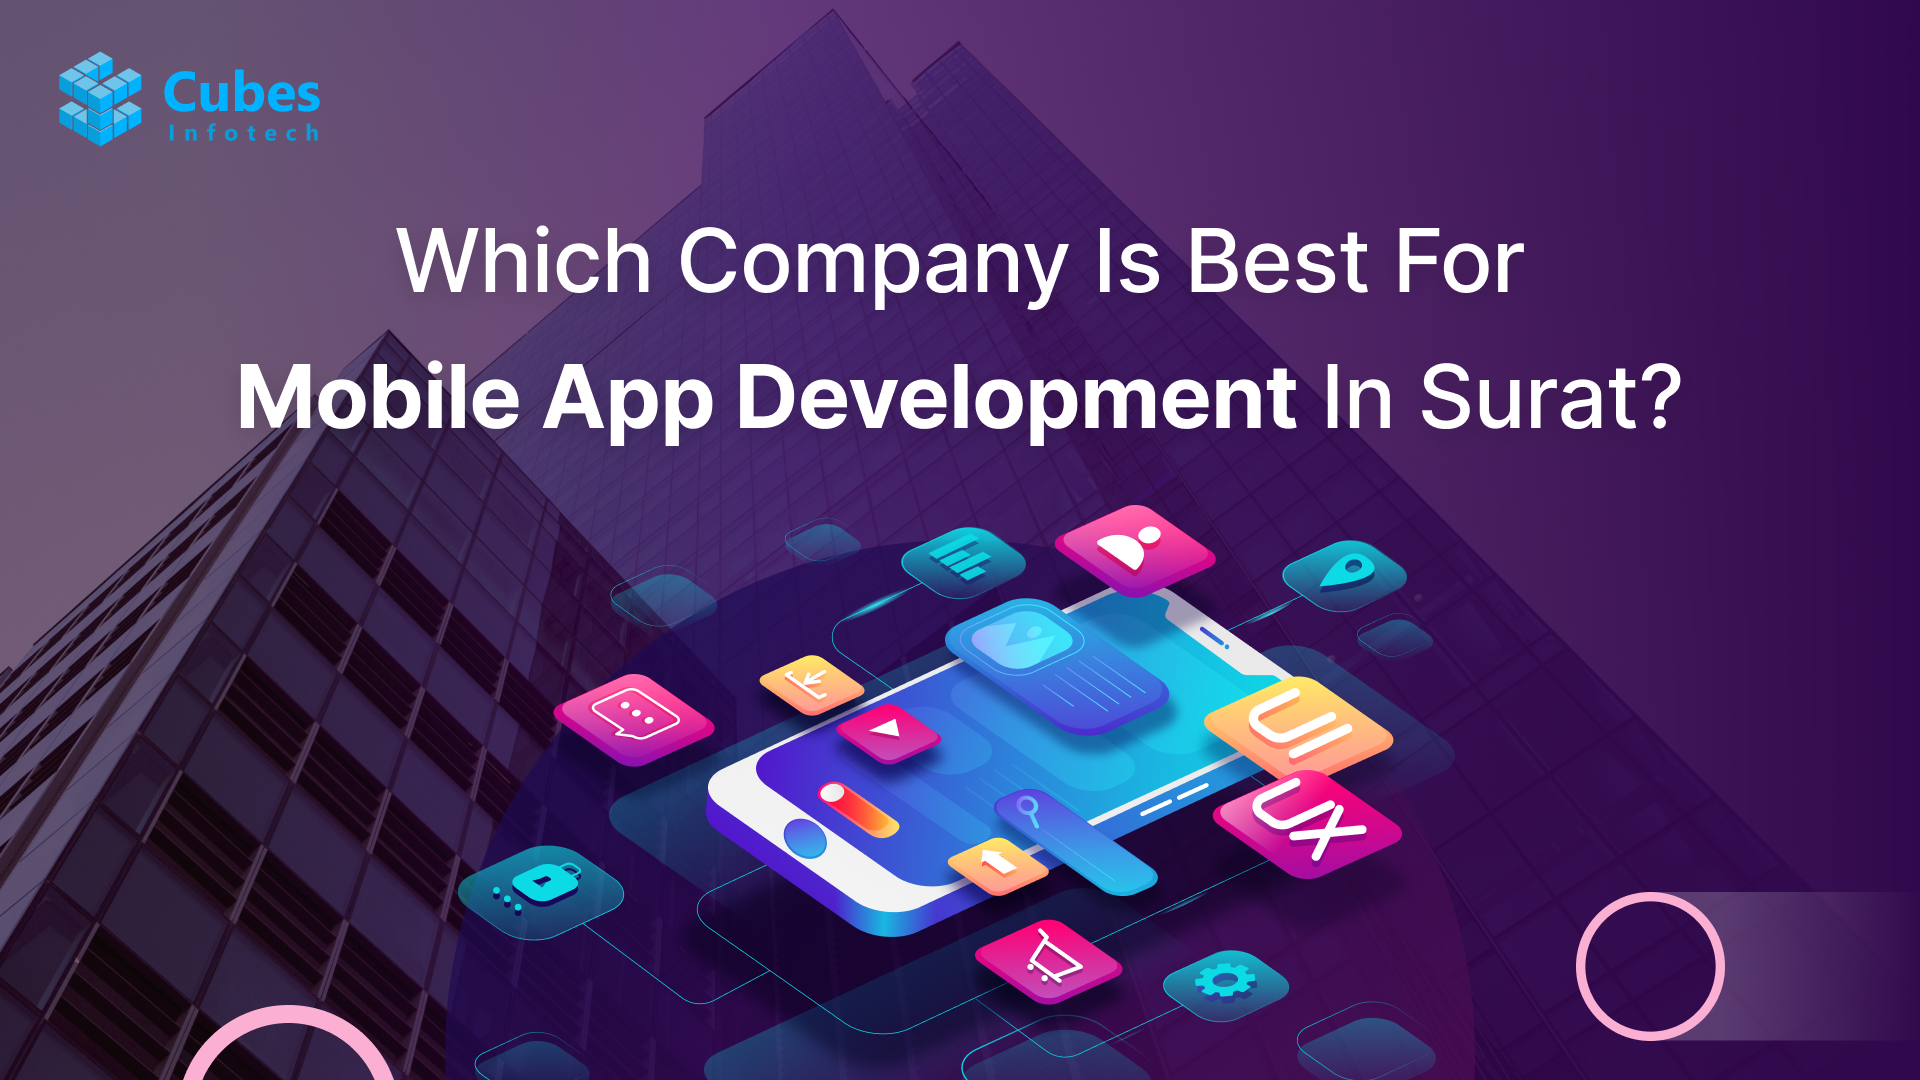 Which Company Is Best For Mobile App Development In Surat?